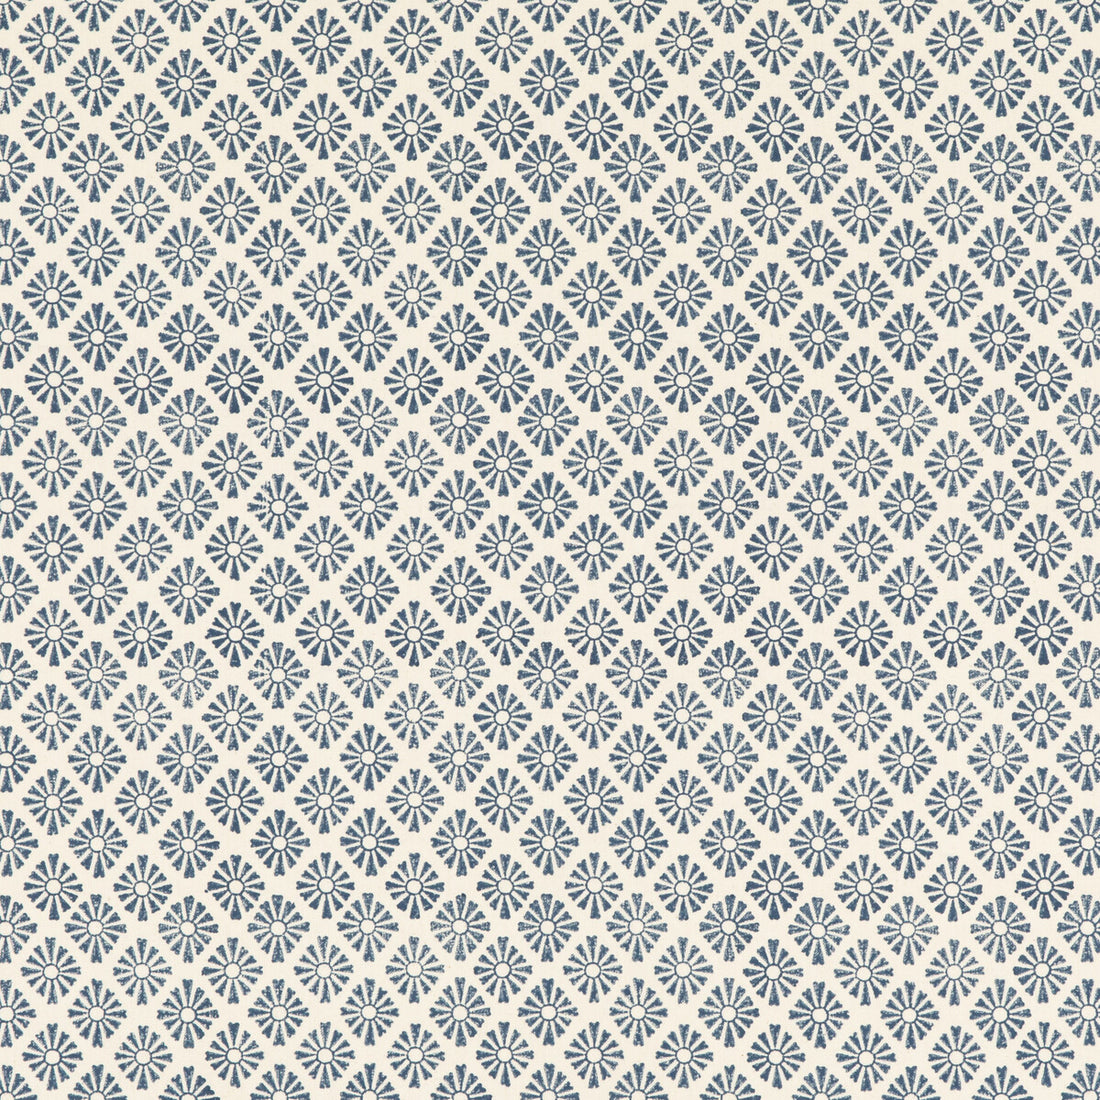 Sunburst fabric in indigo color - pattern PP50476.2.0 - by Baker Lifestyle in the Fiesta collection